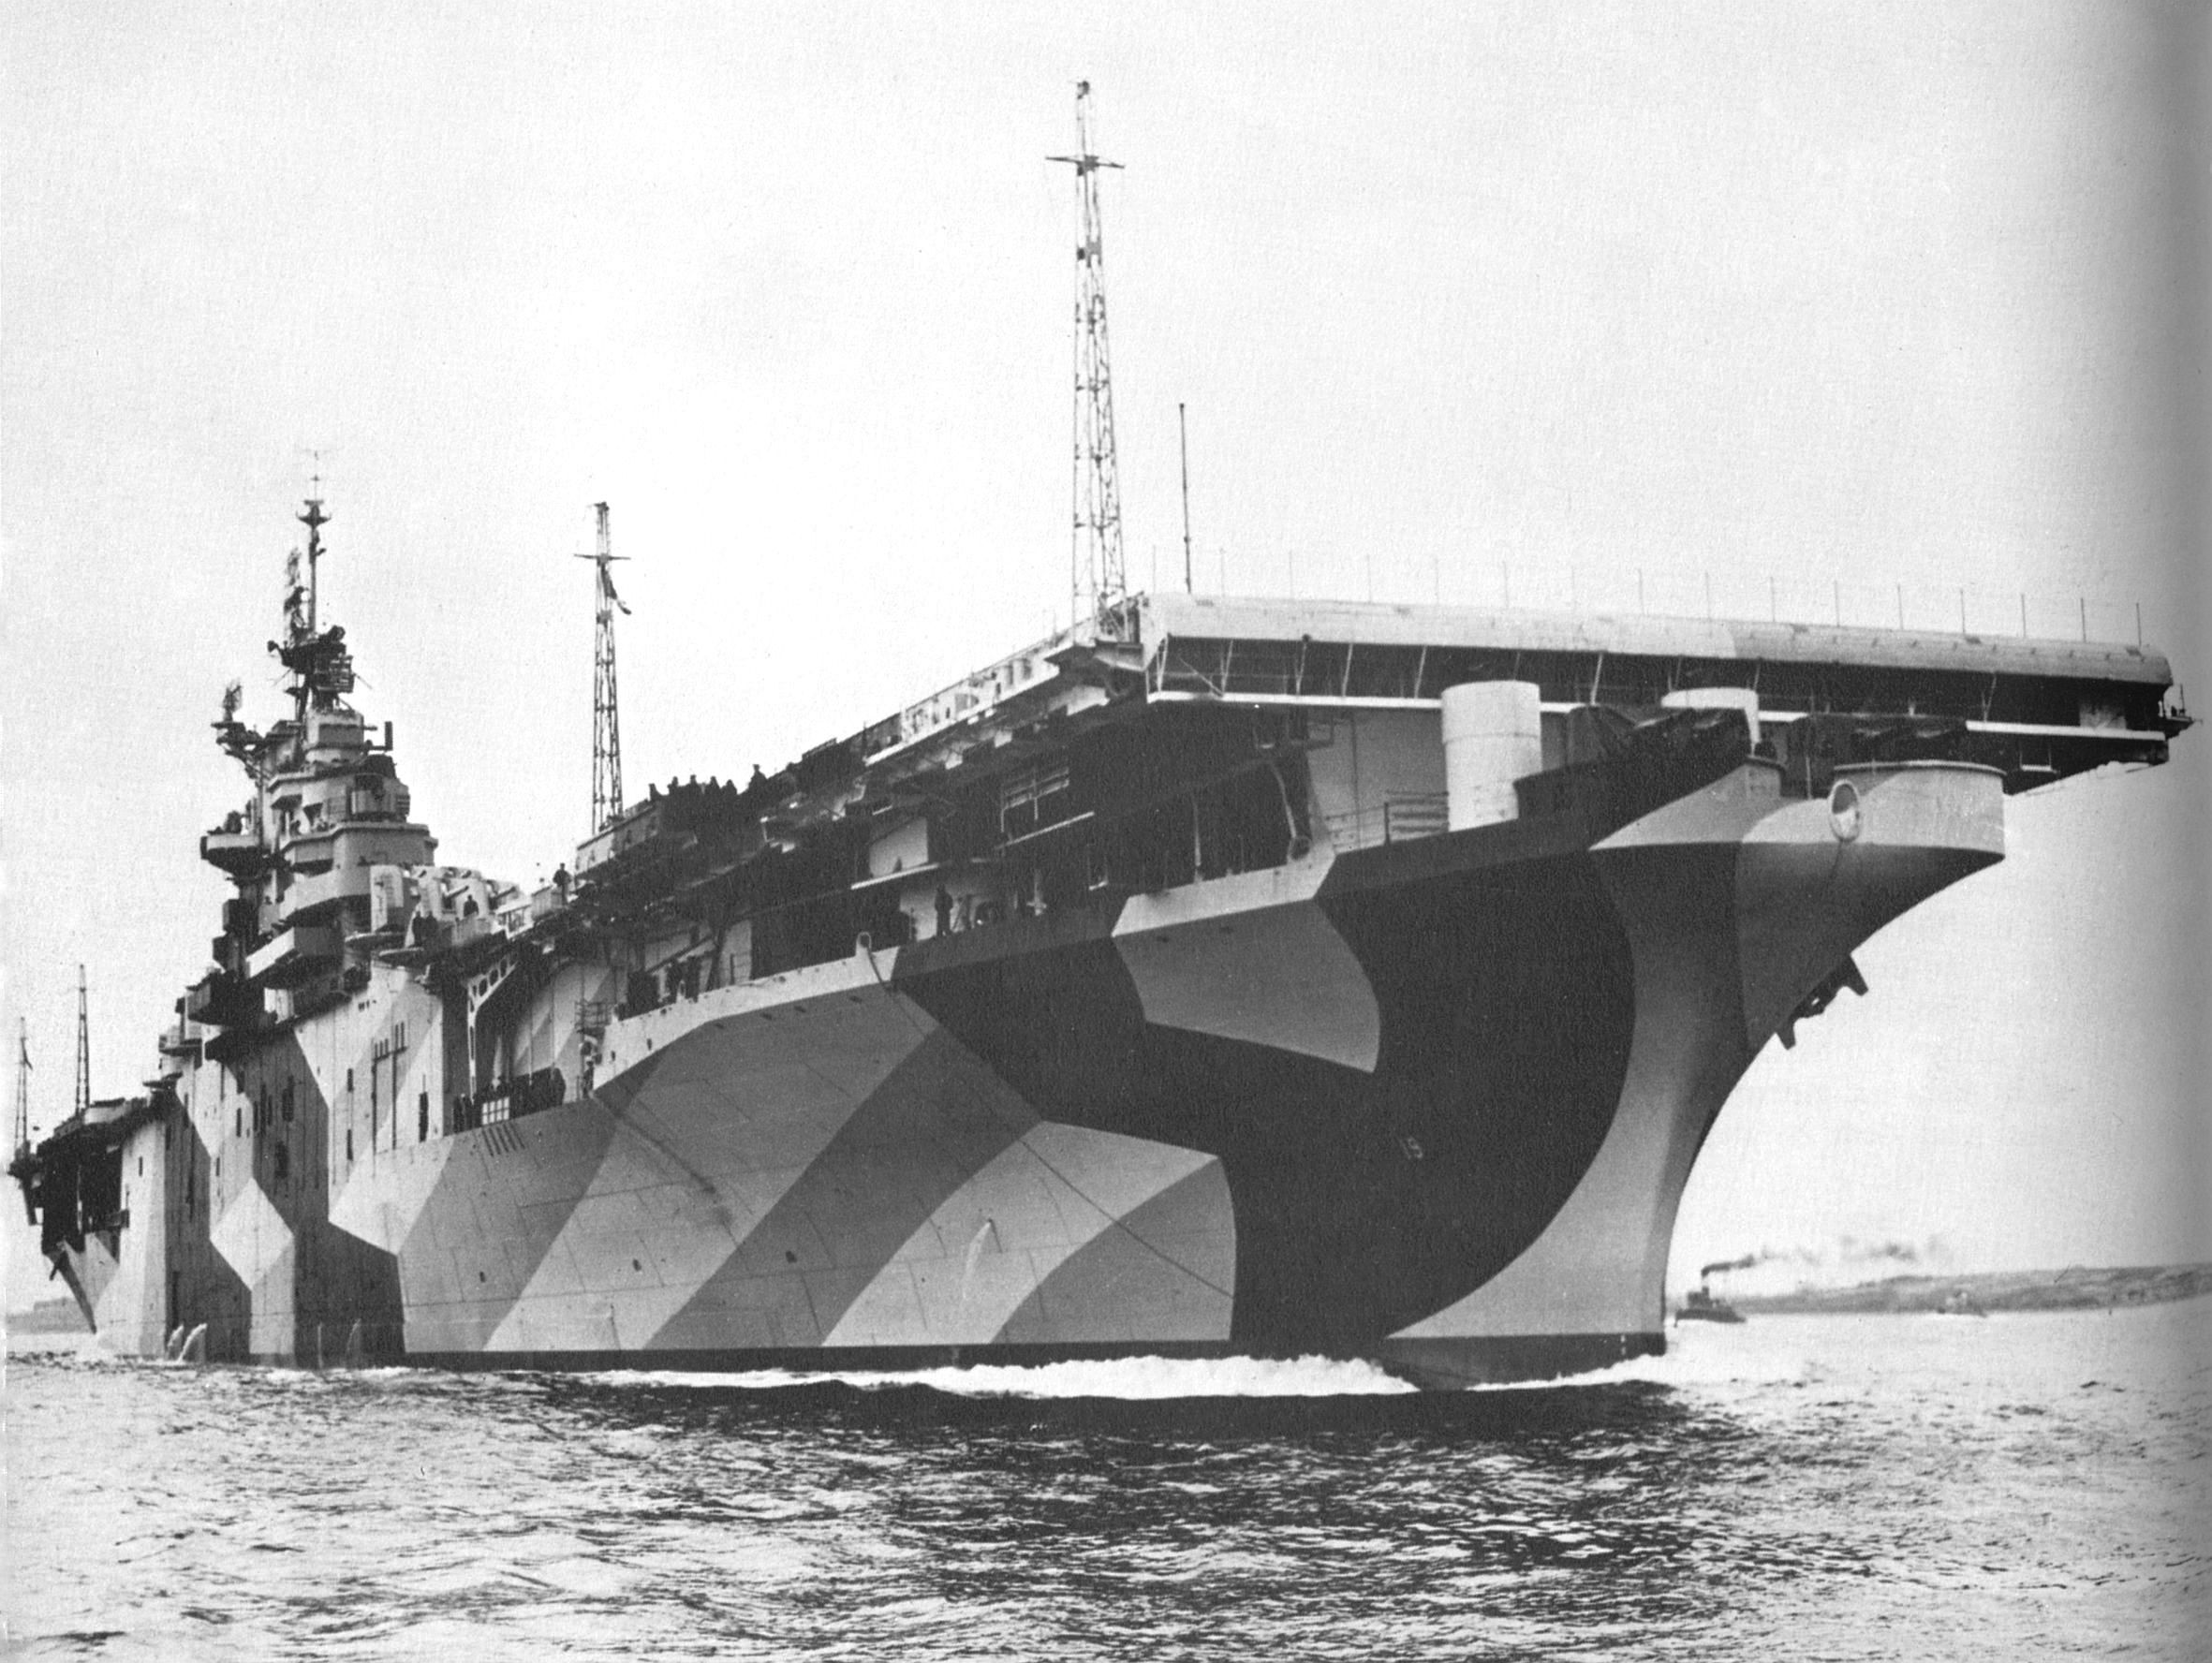 USS Hancock underway across Boston’s outer harbor, Boston, Massachusetts, United States, on her way to anchor at President Roads, 18 May 1944. Photo 1 of 3.